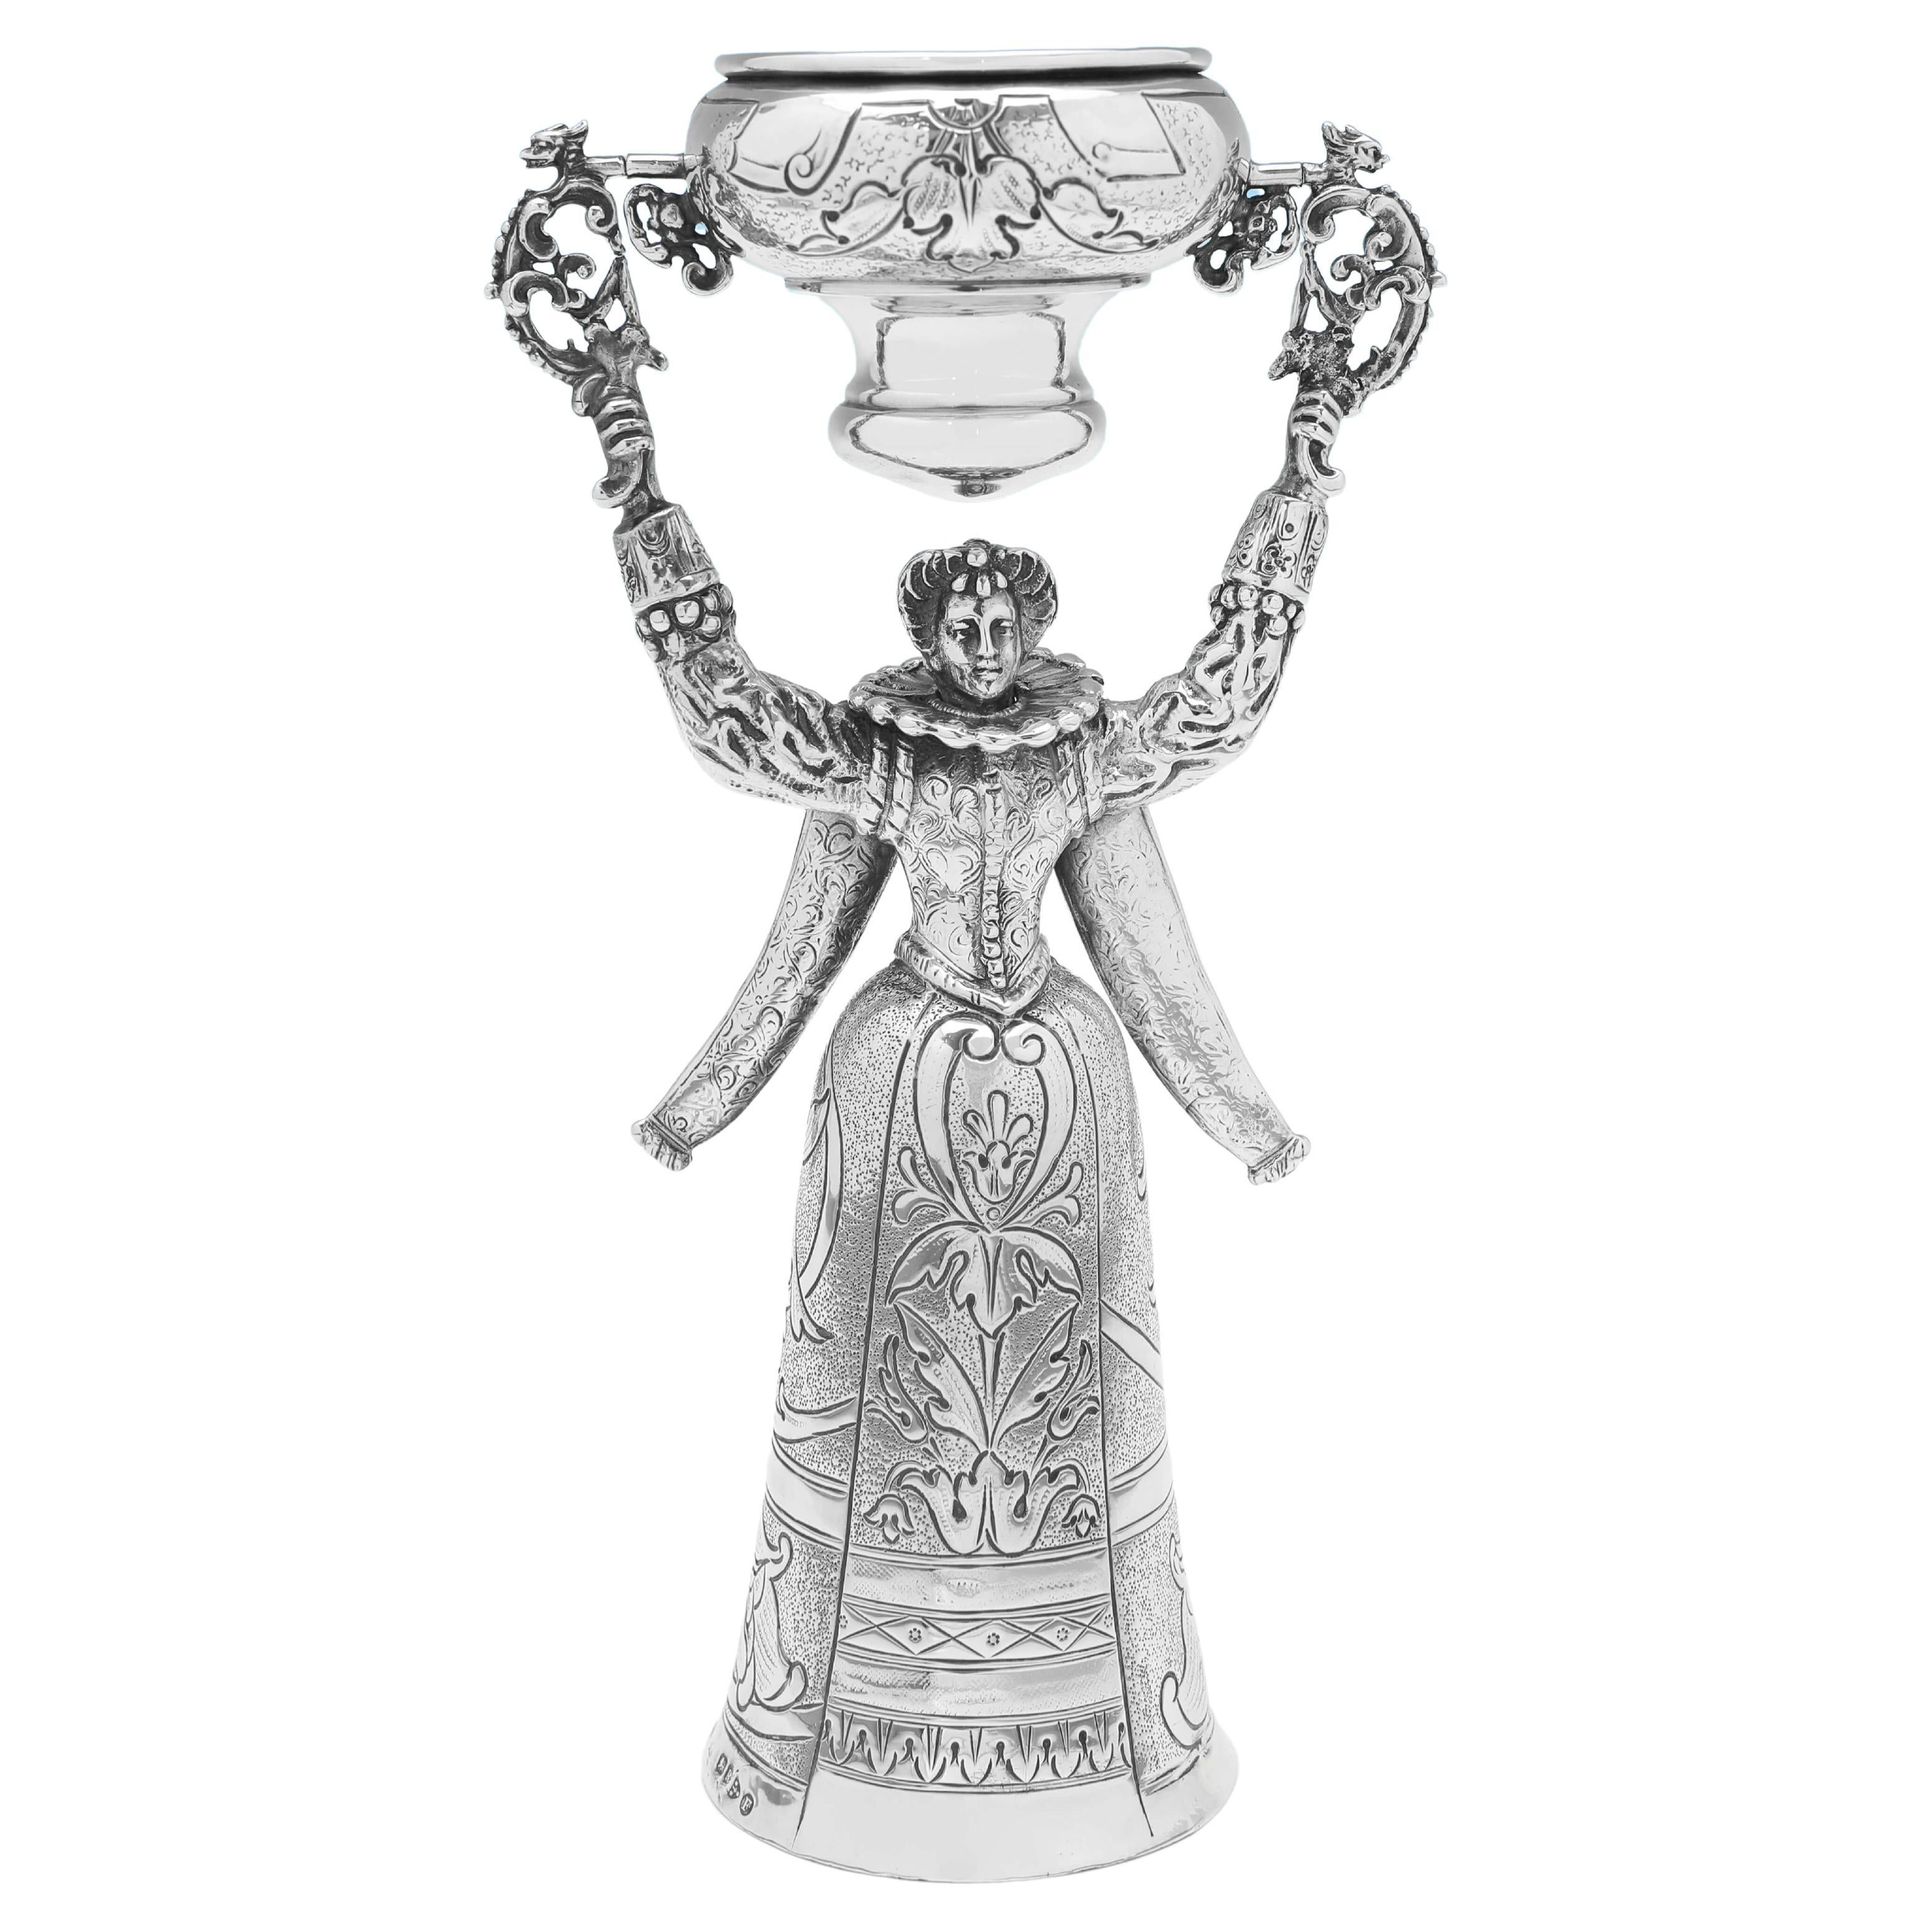 viktorianischer Sterlingsilber Wager Cup / Marriage Cup Chester 1900 Berthold Muller